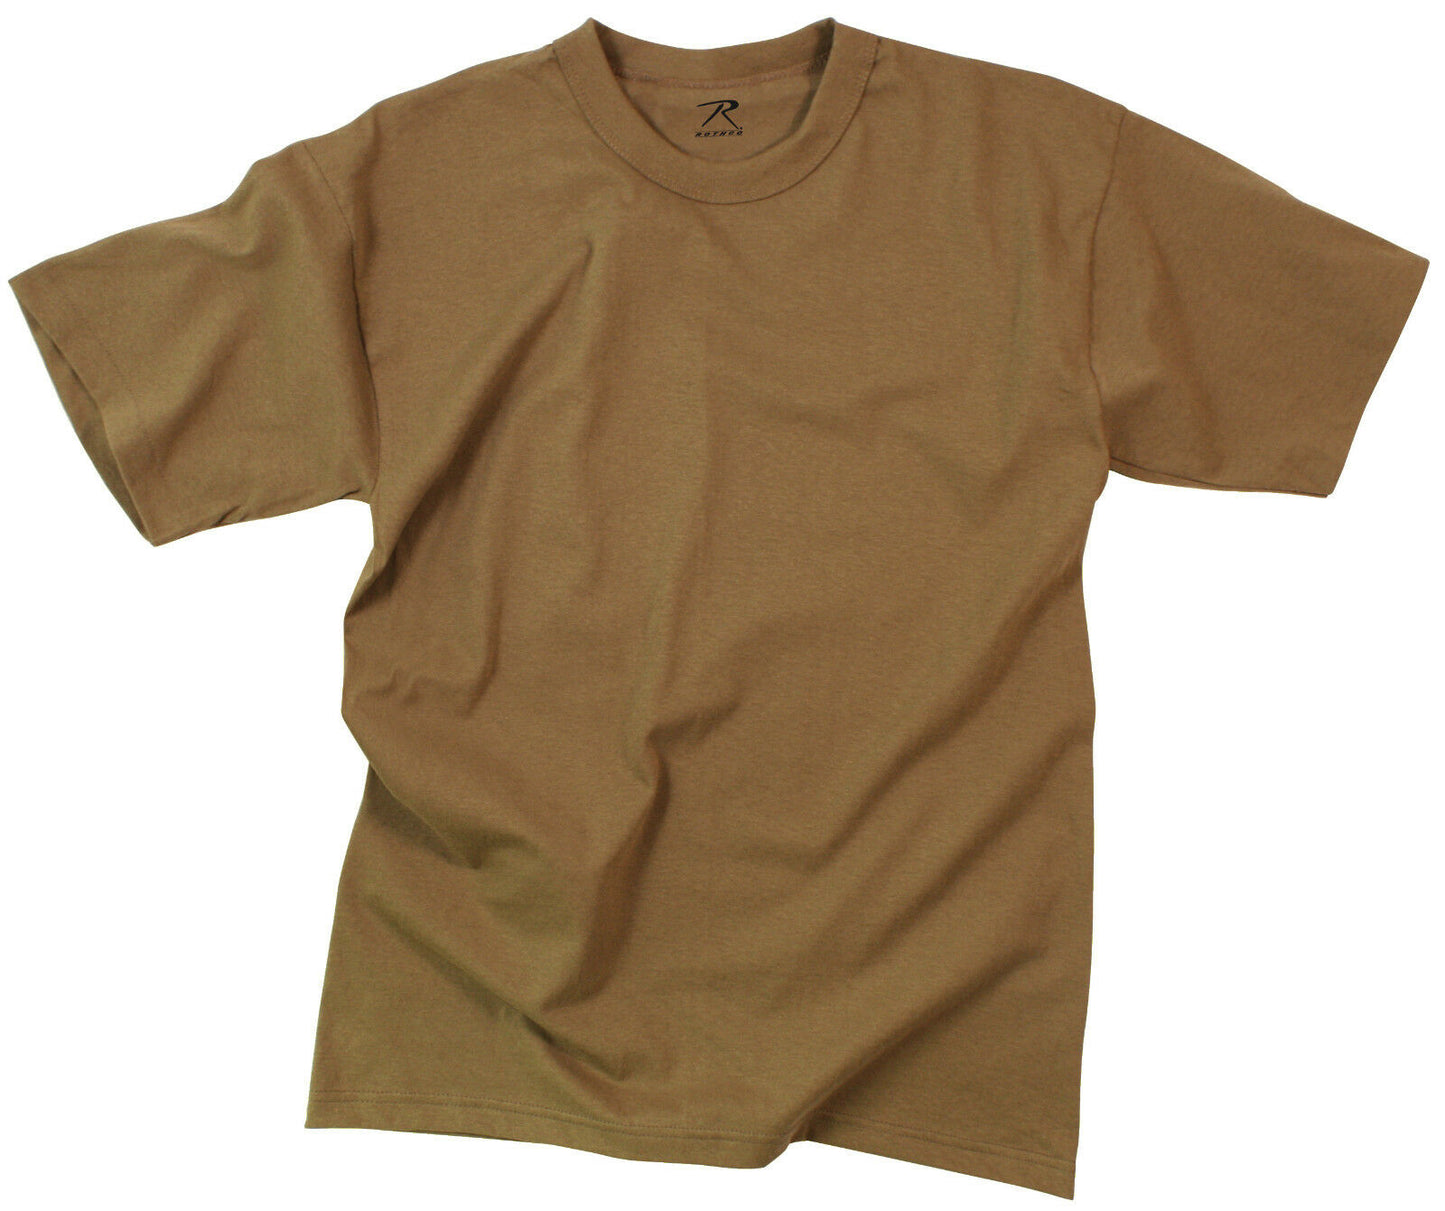 Rothco Solid Color 100% Cotton T-Shirt - 5 Pack Brown